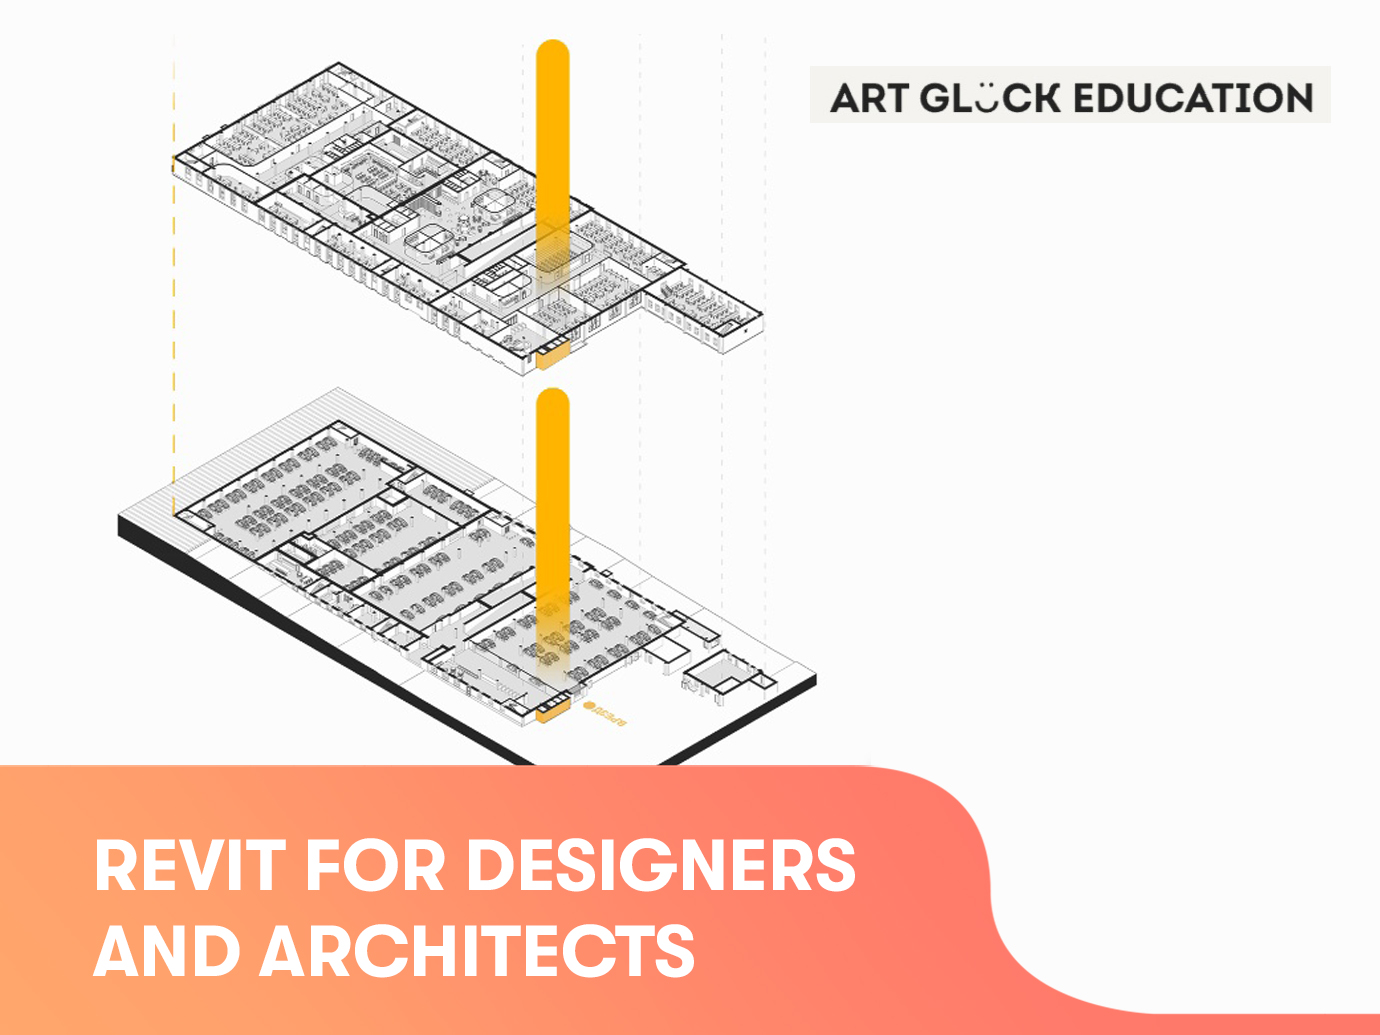 REVIT FOR DESIGNERS AND ARCHITECTS